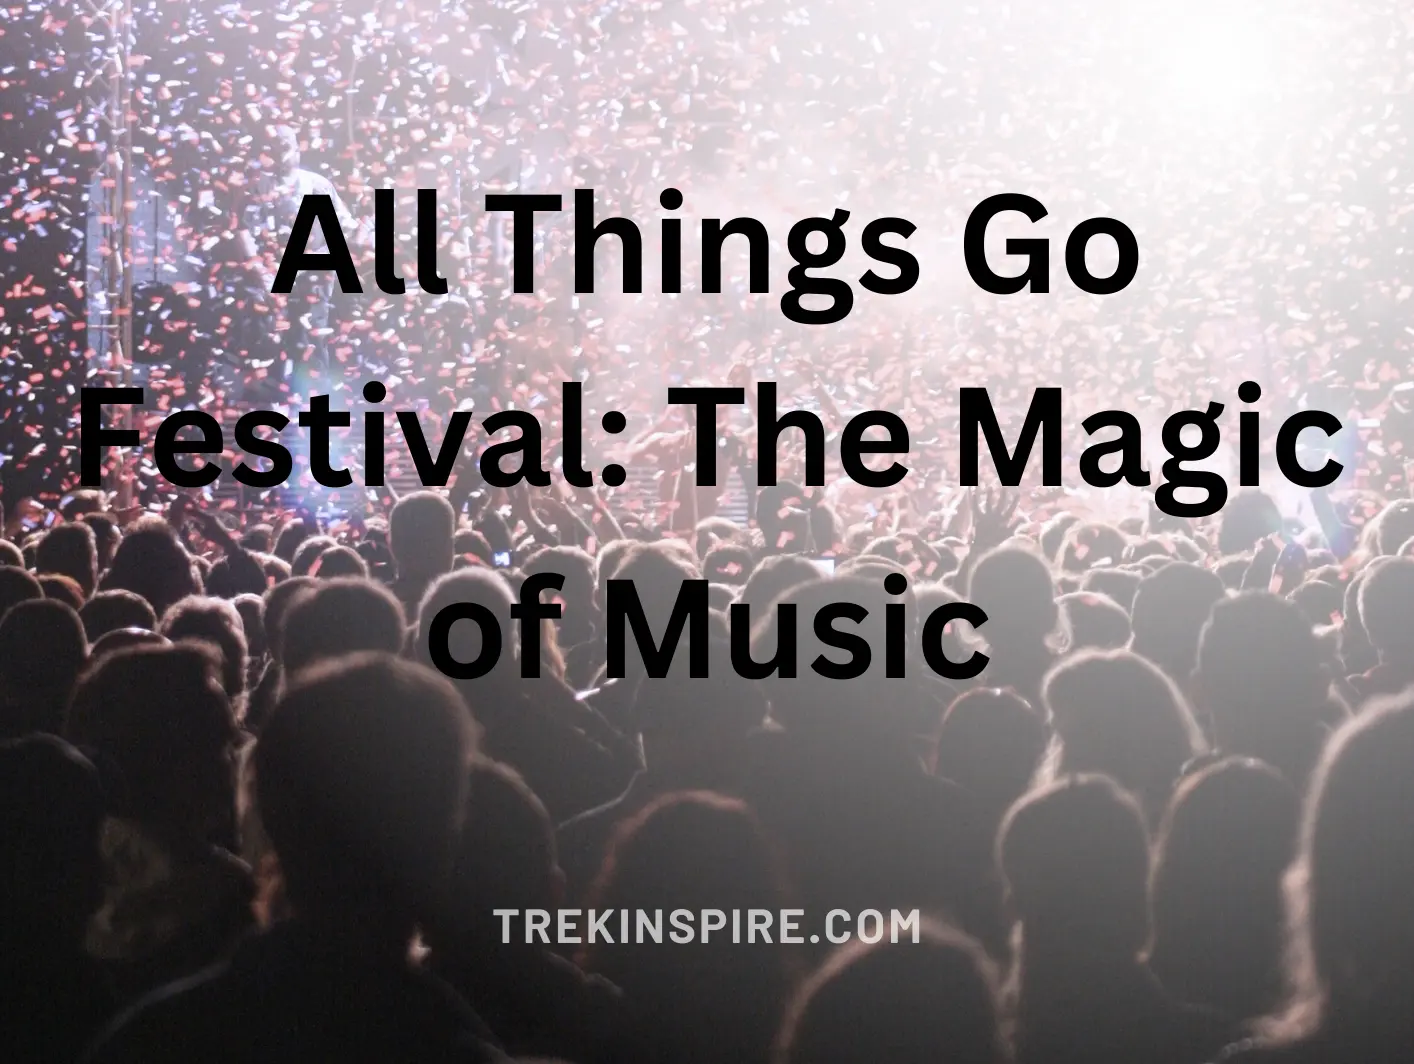 All Things Go Festival The Magic of Music